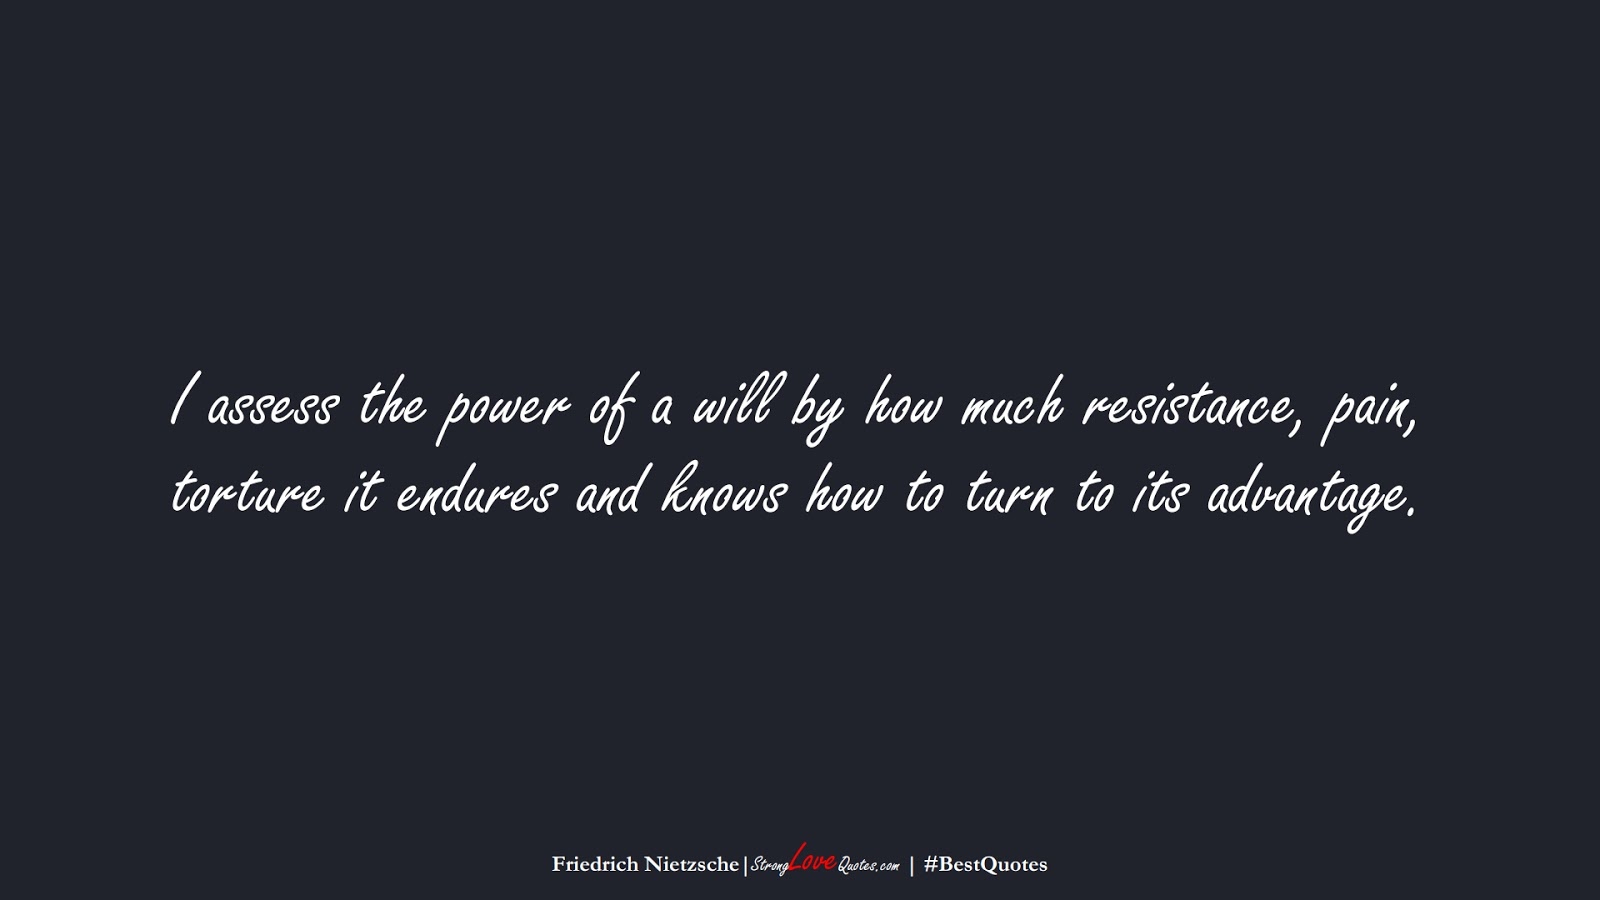 I assess the power of a will by how much resistance, pain, torture it endures and knows how to turn to its advantage. (Friedrich Nietzsche);  #BestQuotes